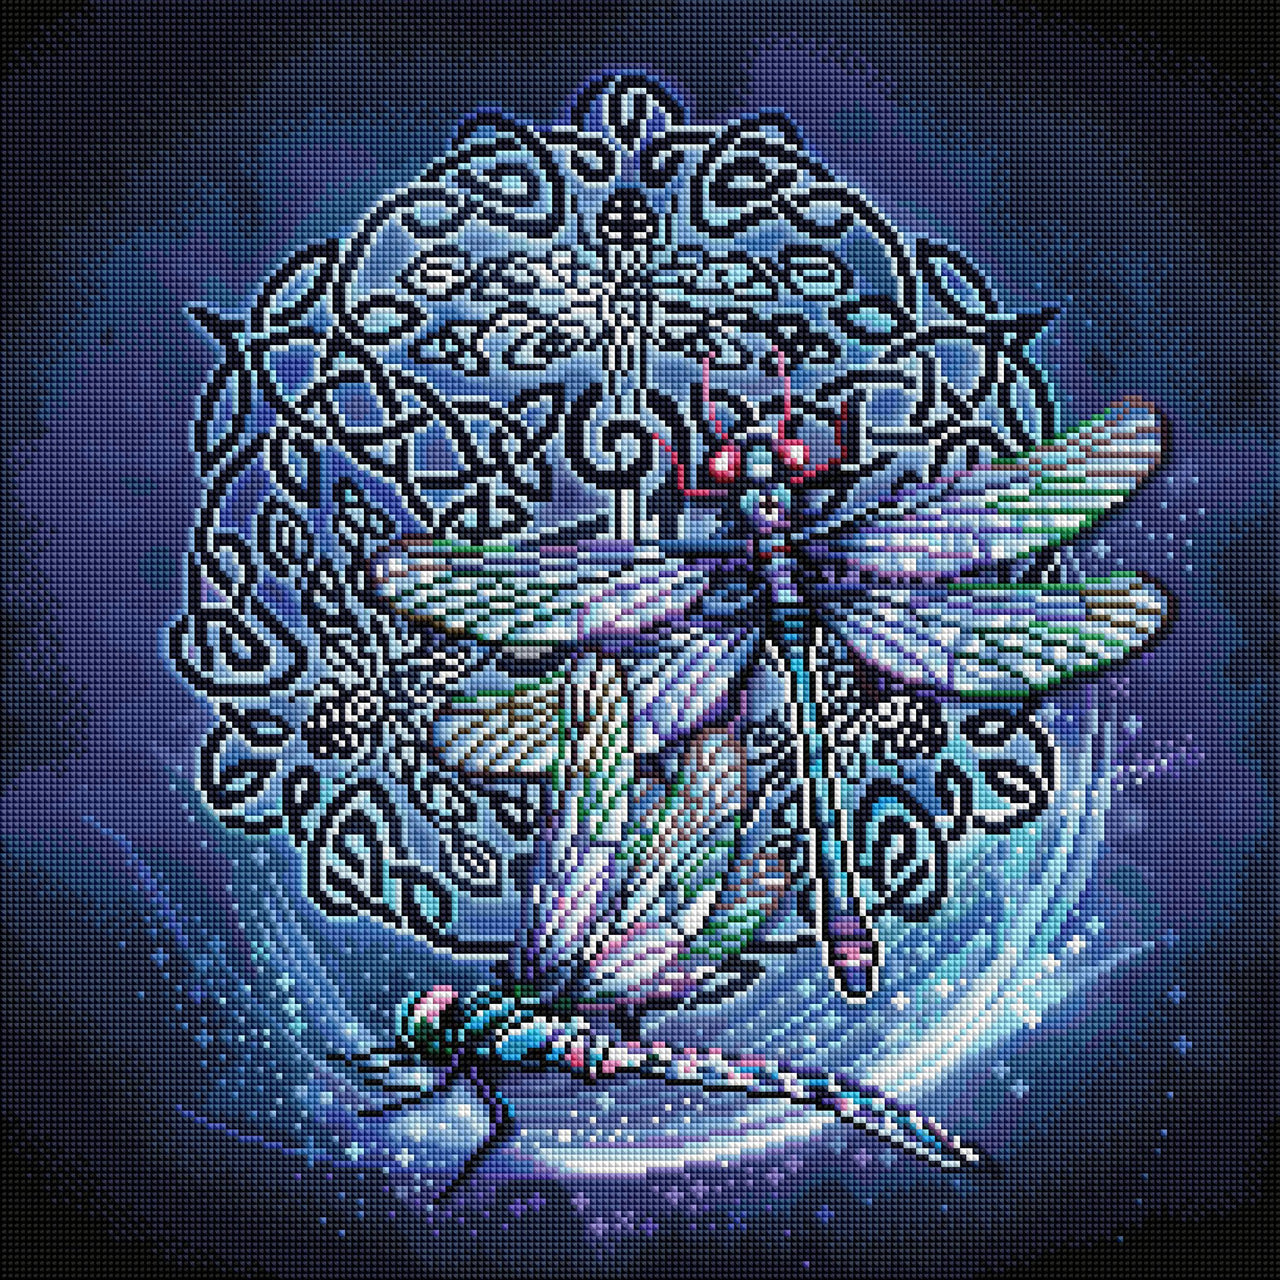 Diamond Painting Celtic Dragonfly 20" x 20" (50.8cm x 50.8cm) / Square With 44 Colors Including 4 ABs / 41,616